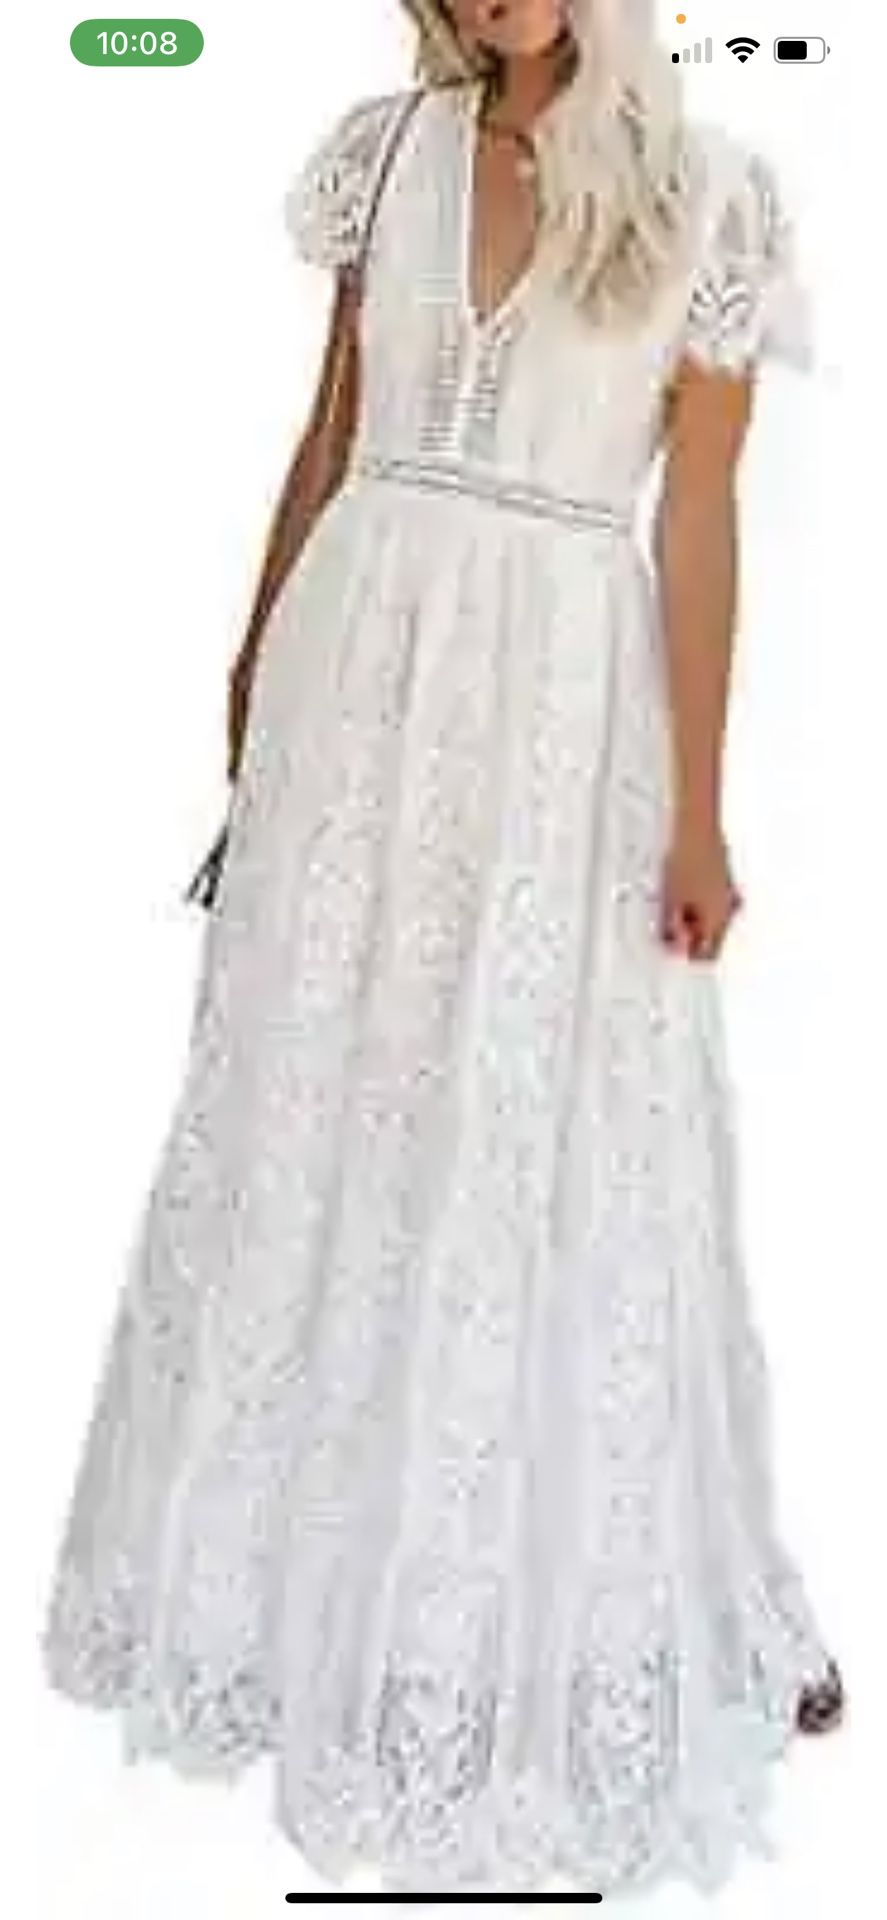 New White Long Floral Dress Party Wedding S